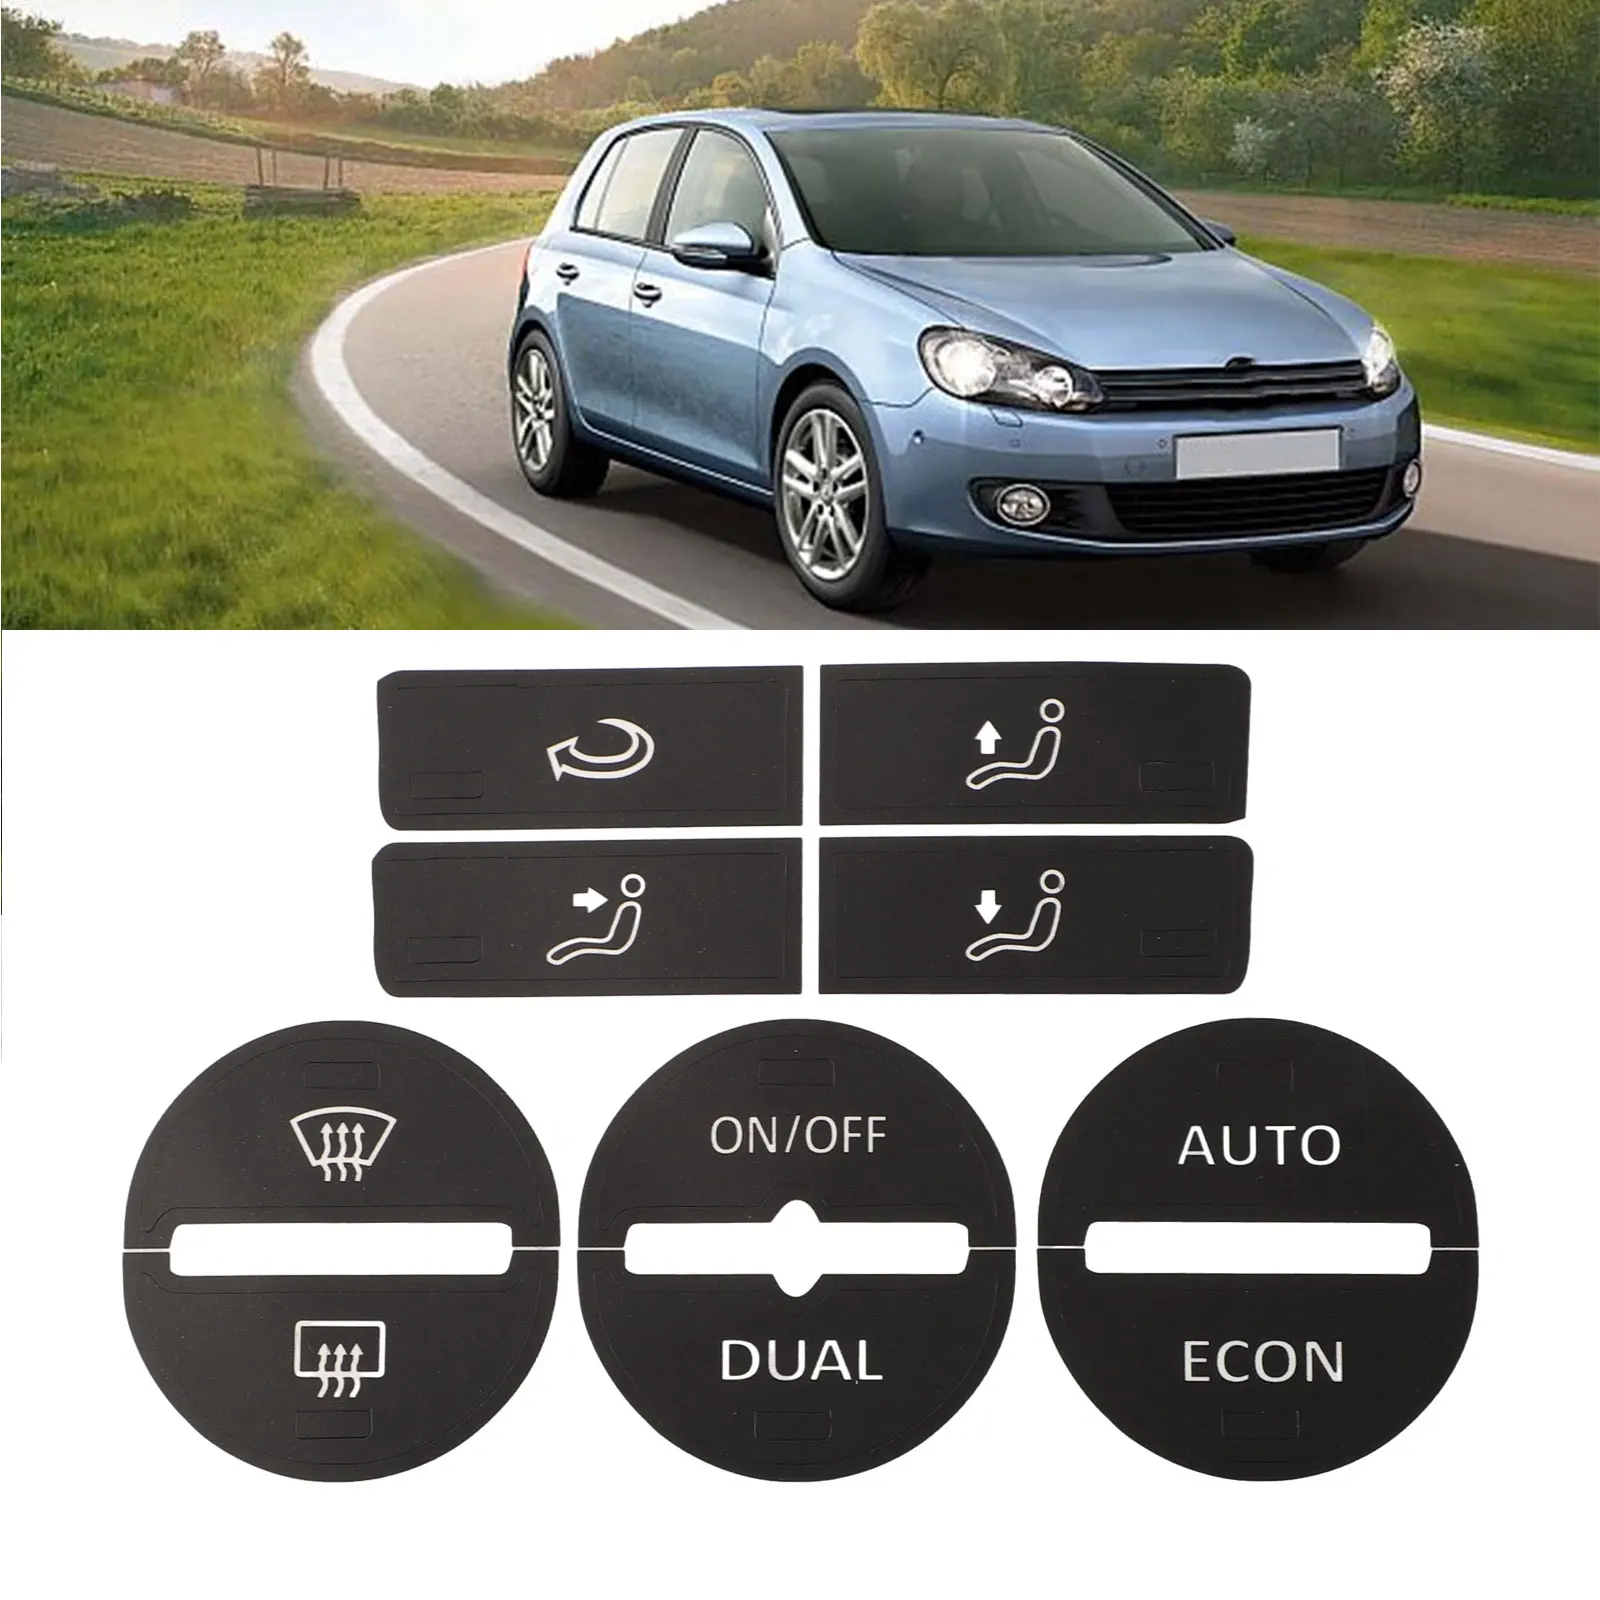 

Fade Resistant AC Control Button Worn Repair Kit Decals Stickers for GOLF Mk5 0408 Black Overlay with White Characters